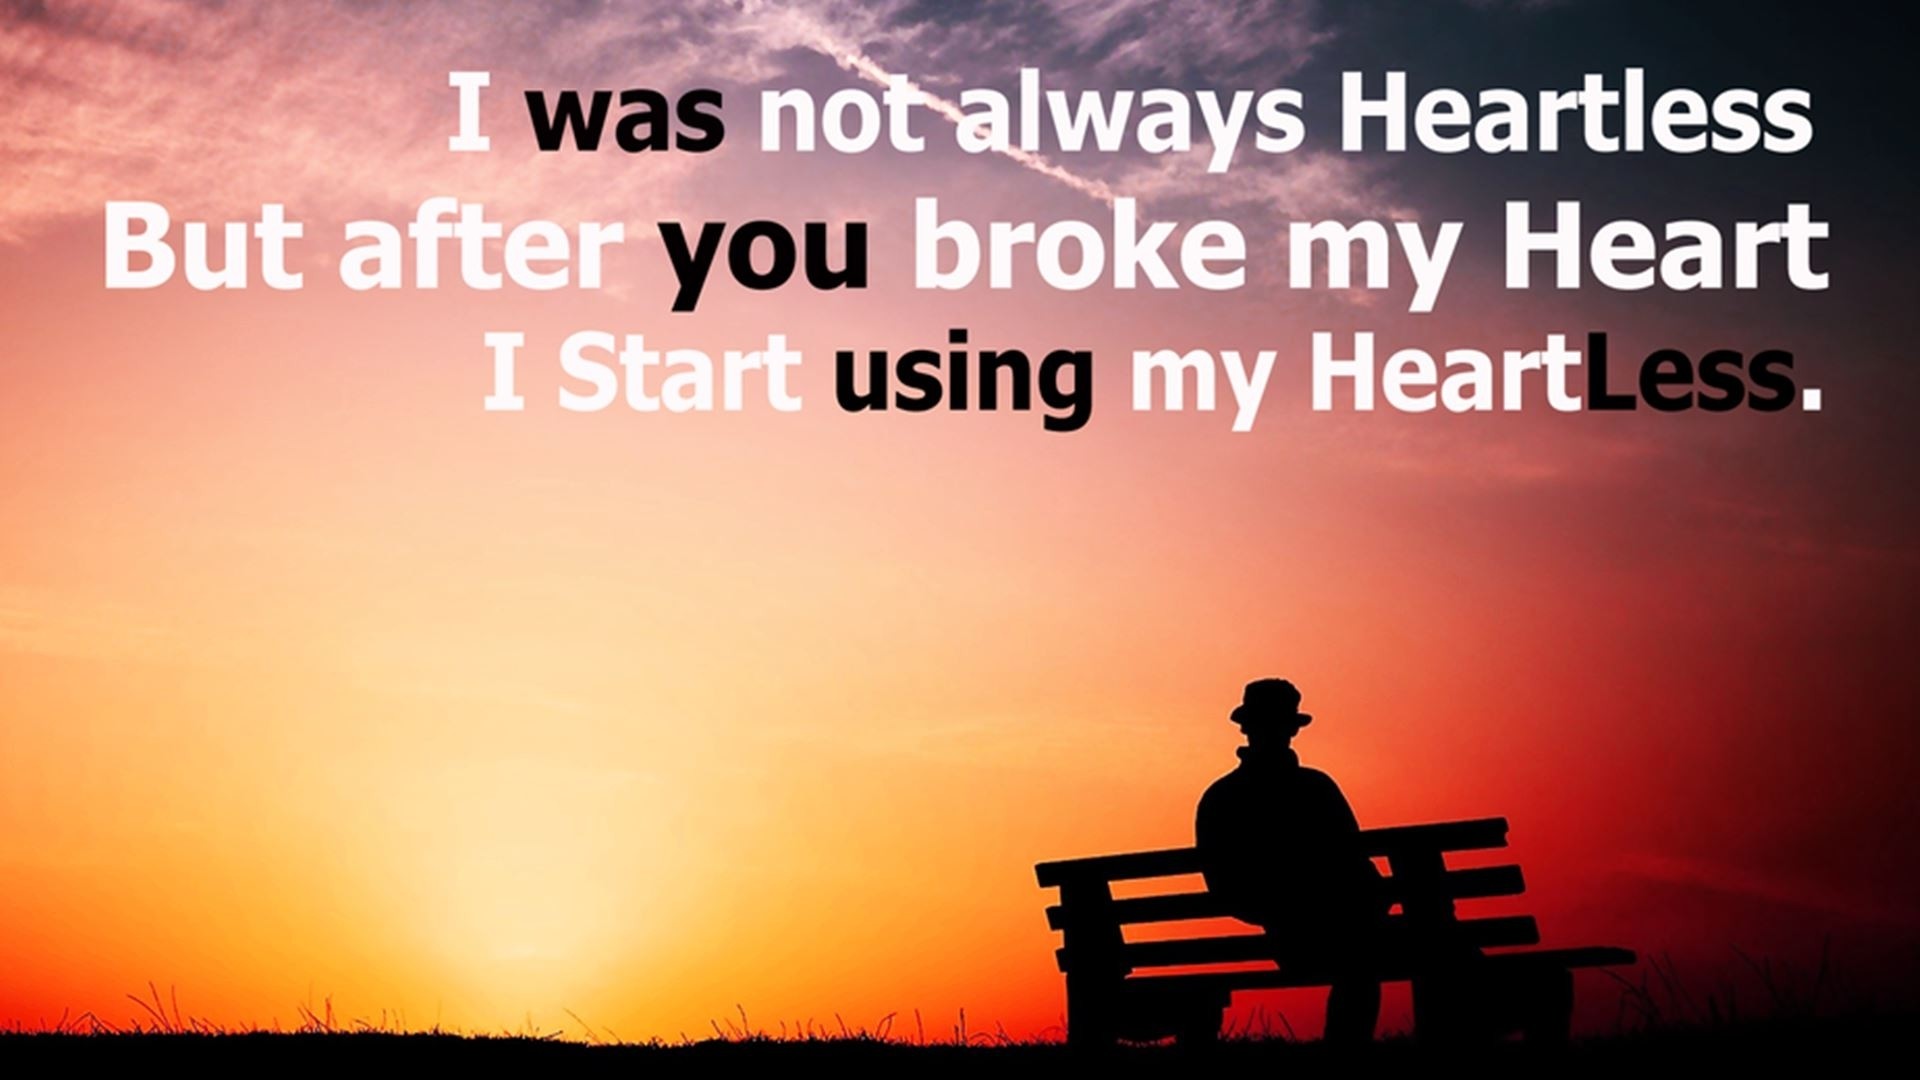 1920x1080 Images Of Broken Hearts With Quotes Inspirational Quotes For Broken Hearted  Girl Broken Girl Quotes